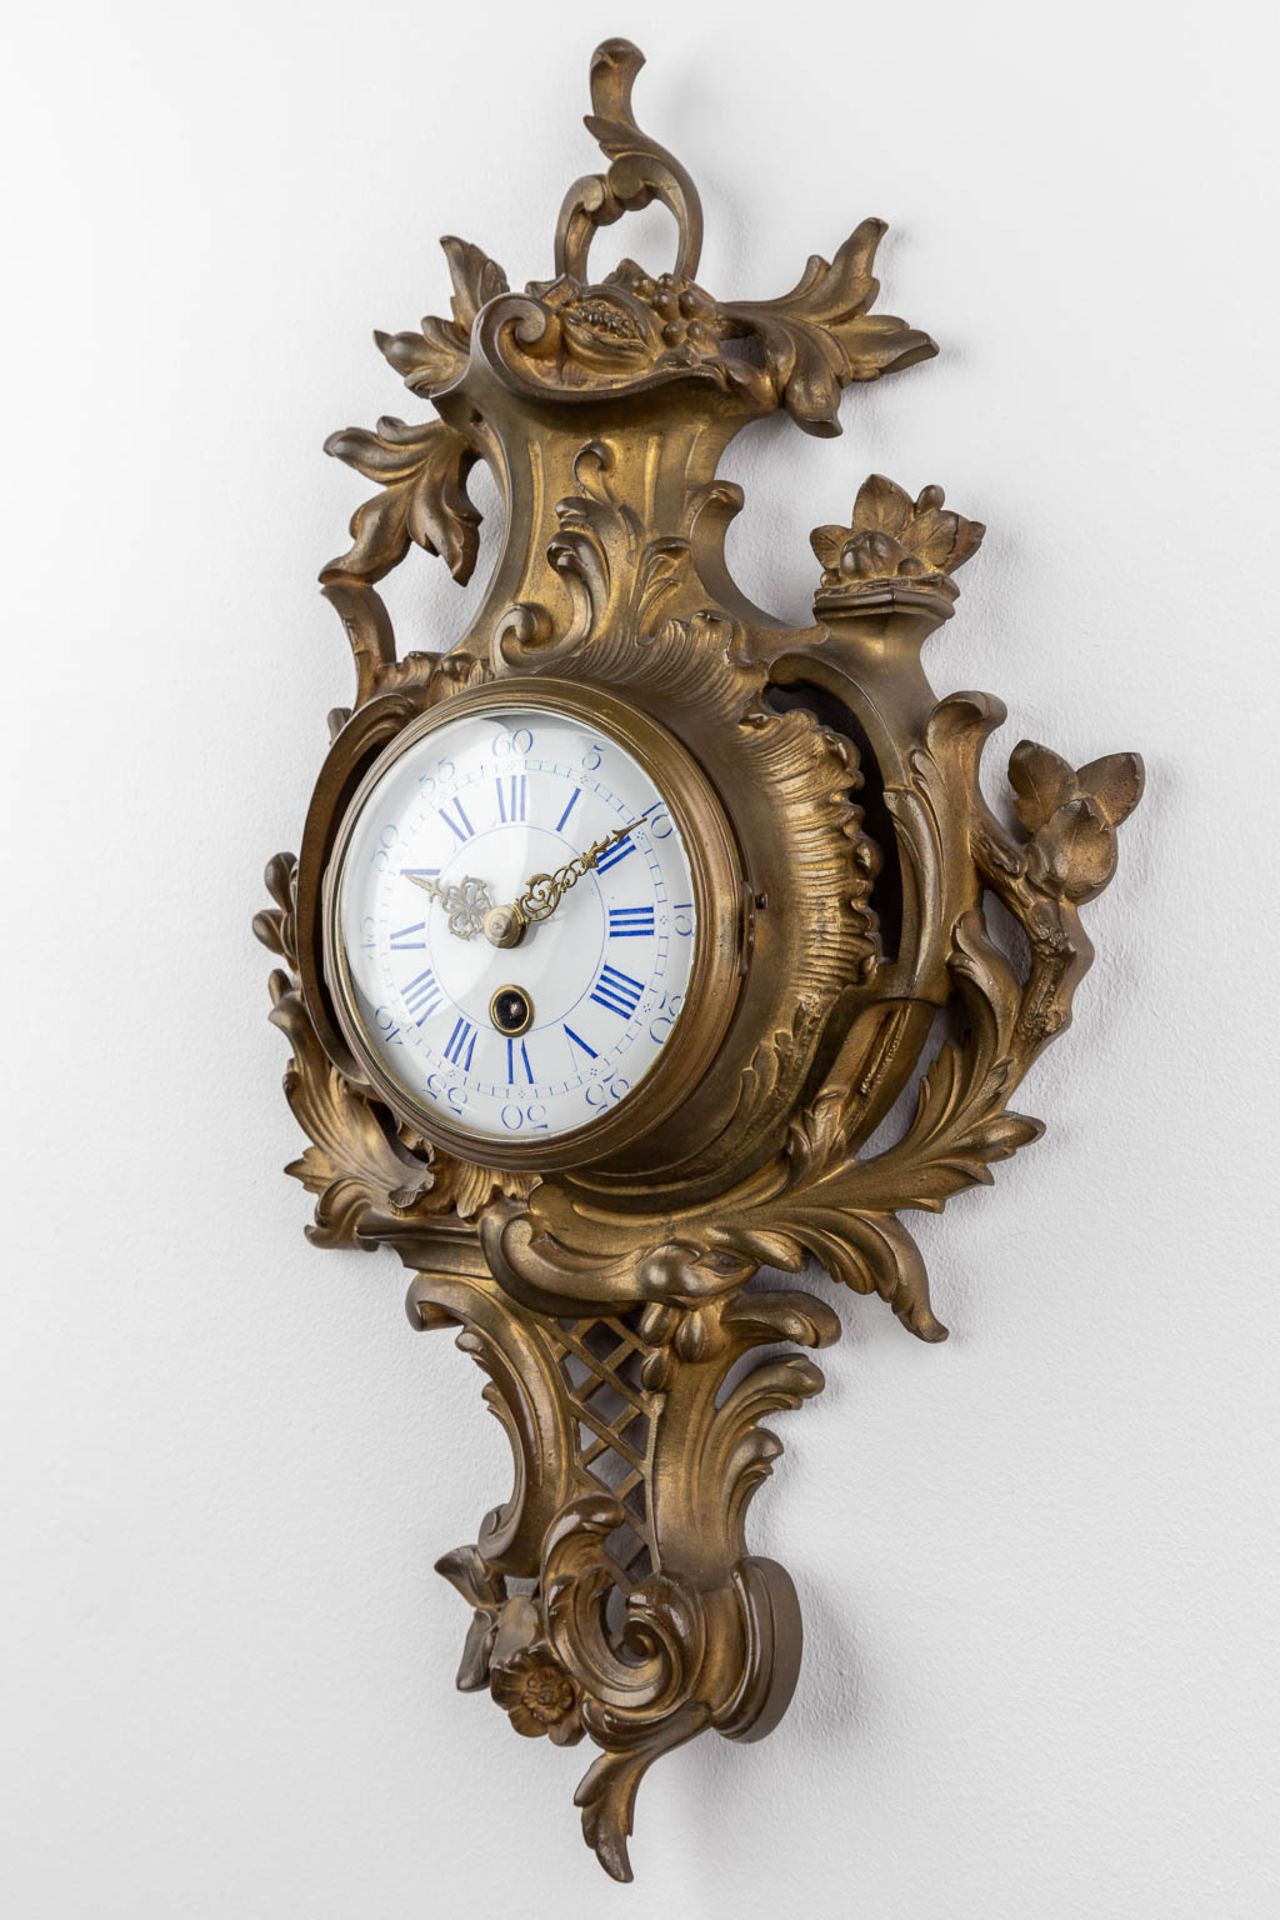 A cartel clock, bronze in Louis XV style. 20th C. (W: 30 x H: 52 cm) - Image 8 of 10